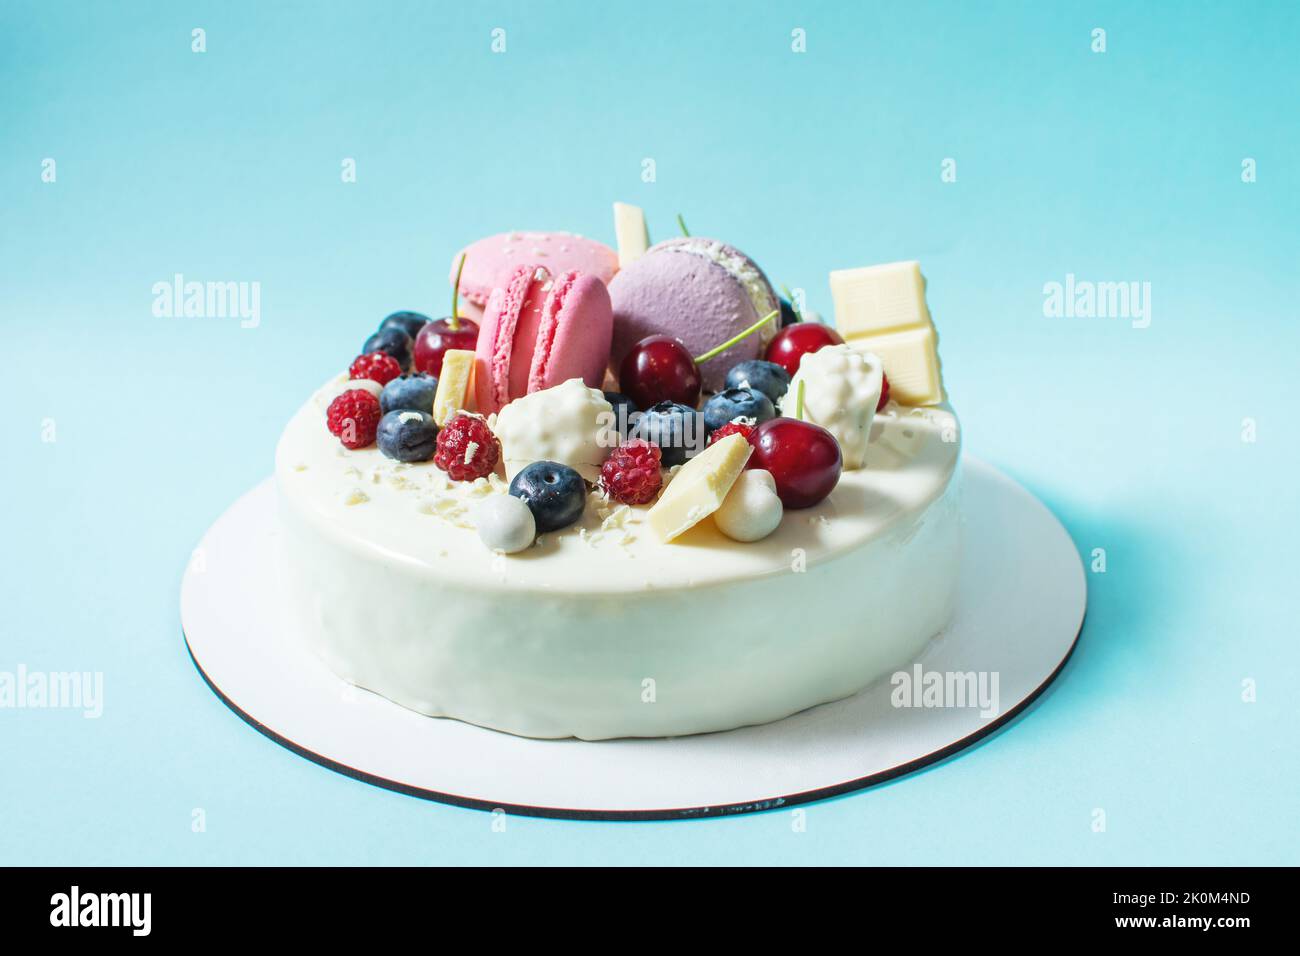 Tender white cake decorated with melted white chocolate, macaroons, meringues, berries and candies on blue background. Stock Photo